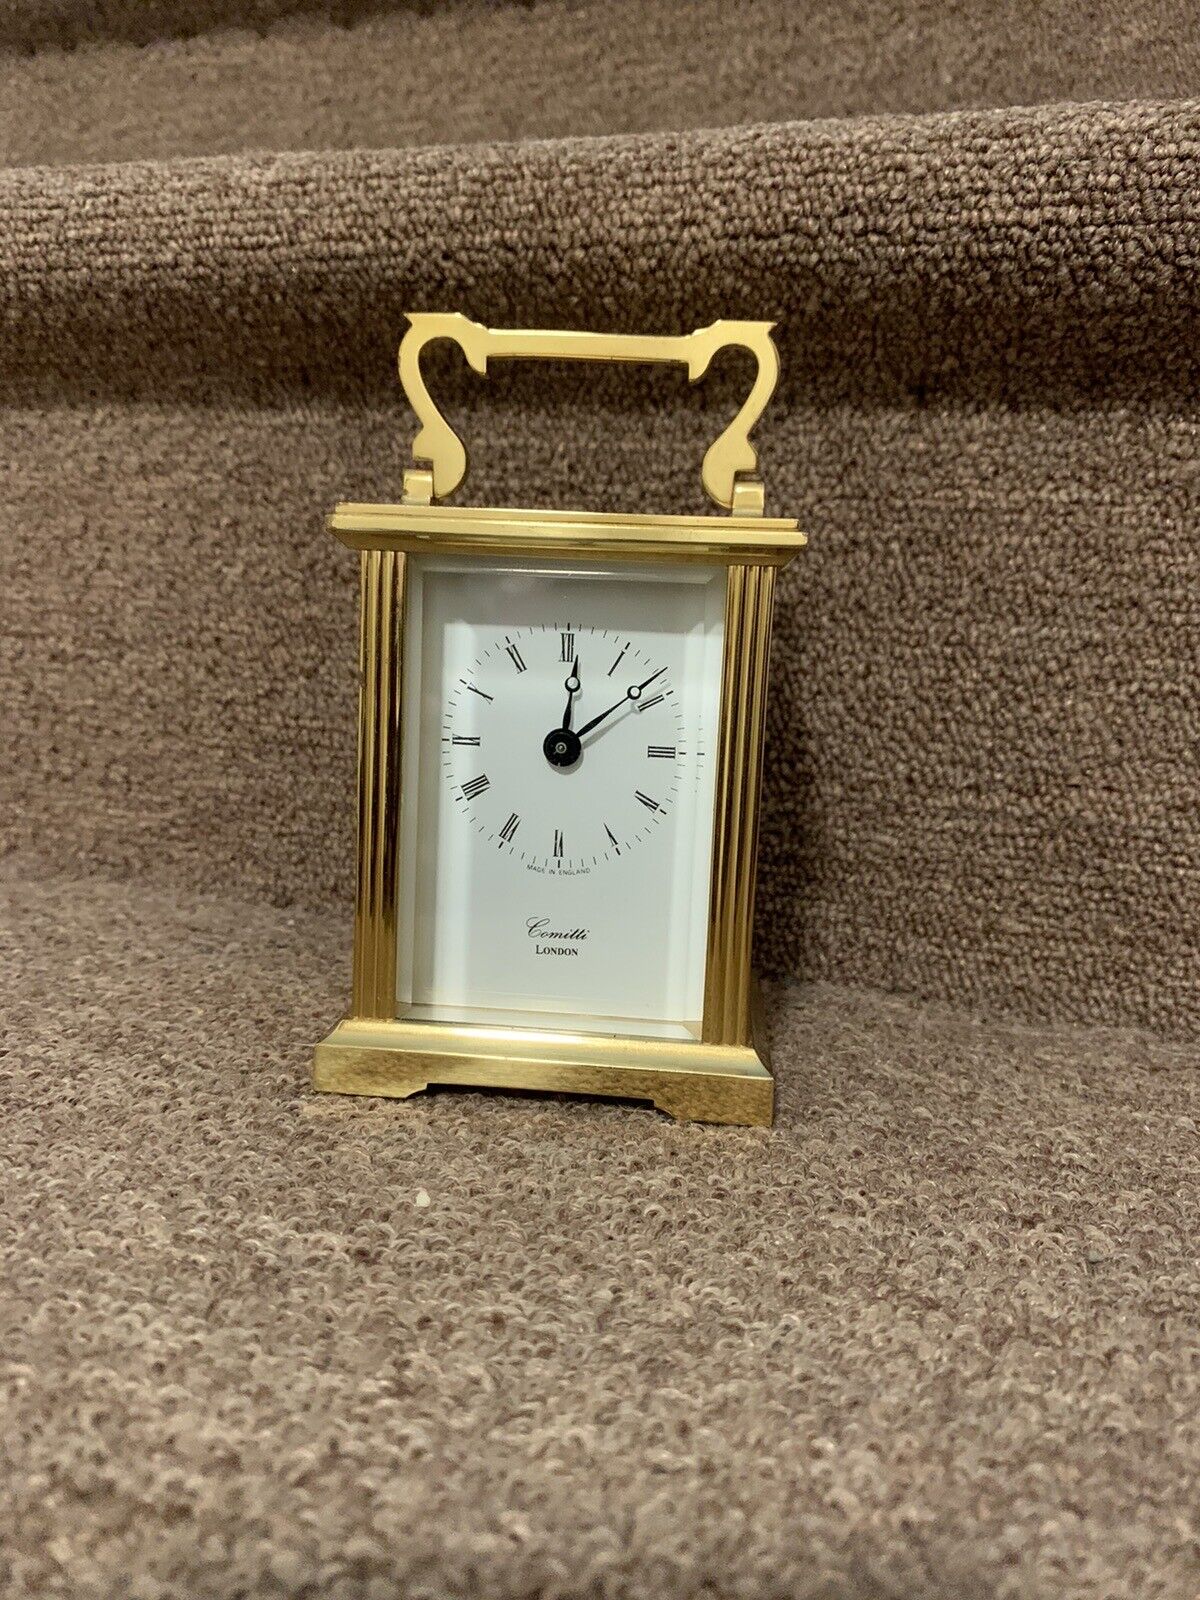 Comitti Battery Carriage Clock - Brass ? - Works - Heavy